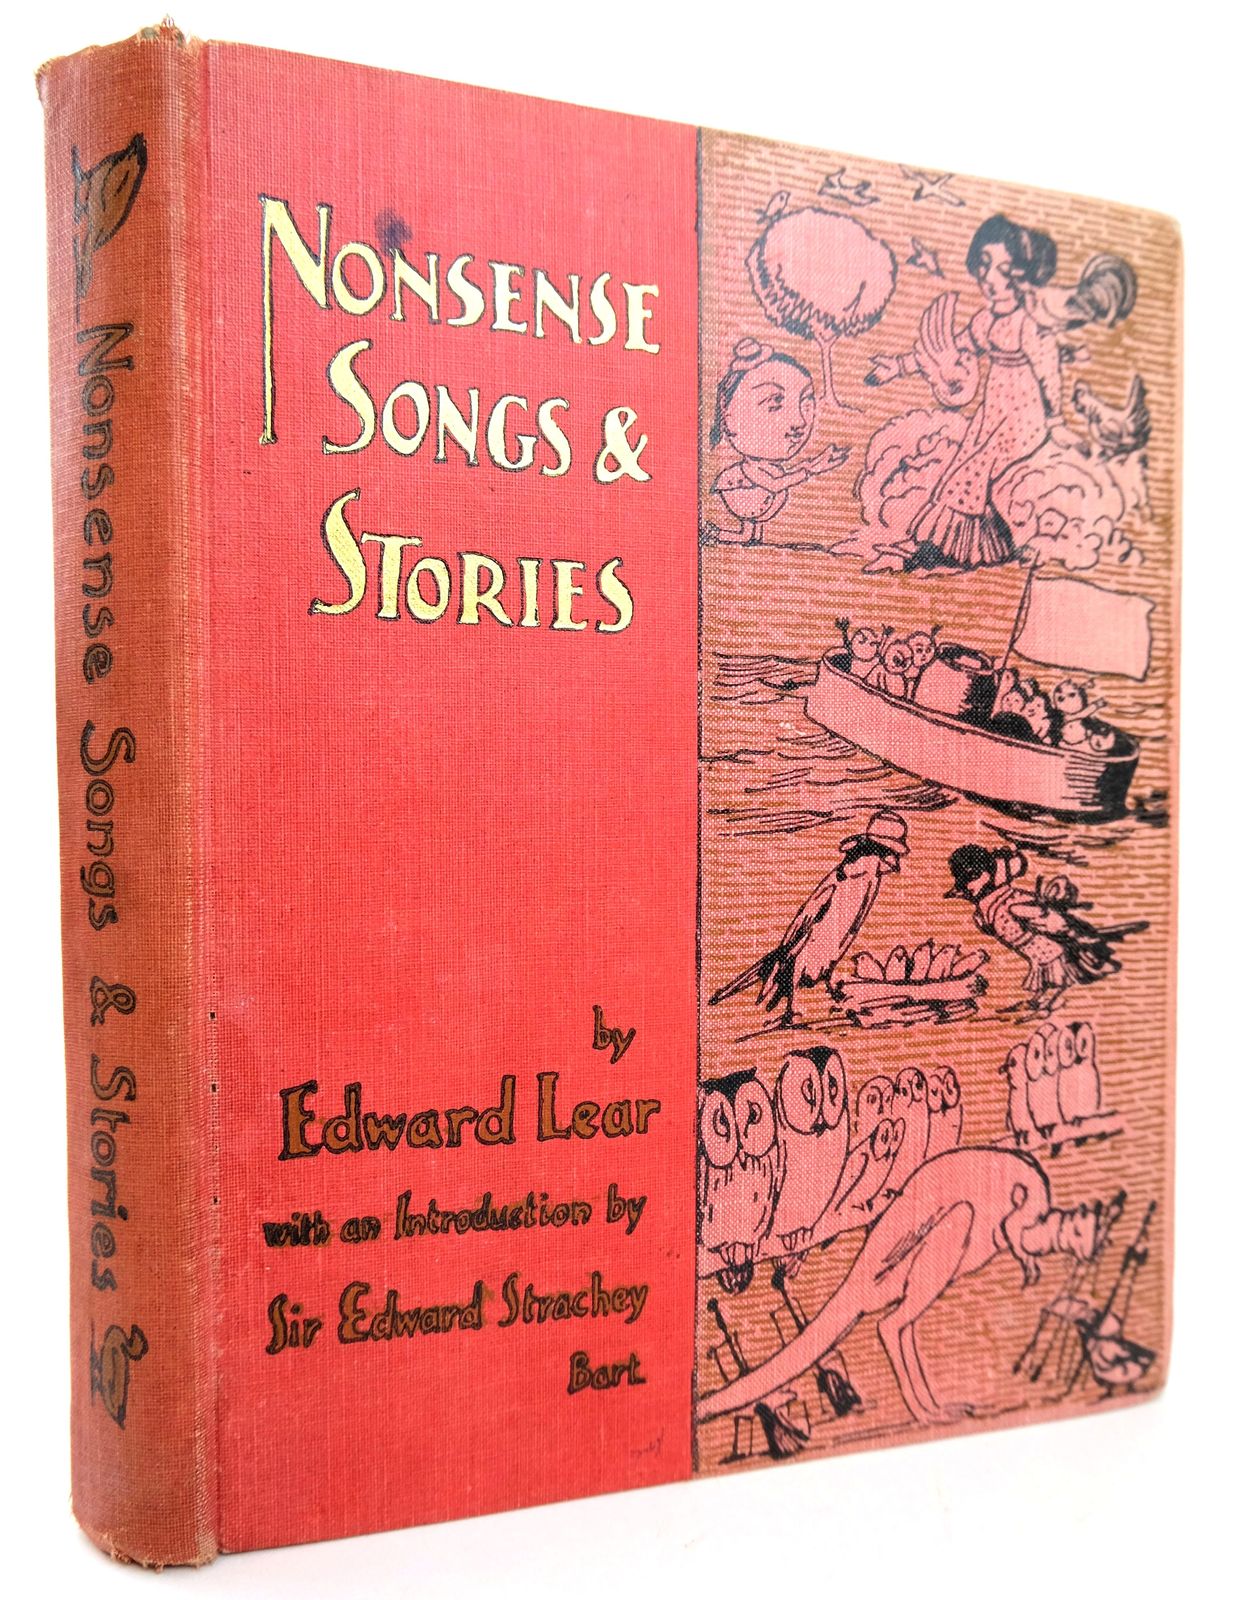 Nonsense Songs And Stories